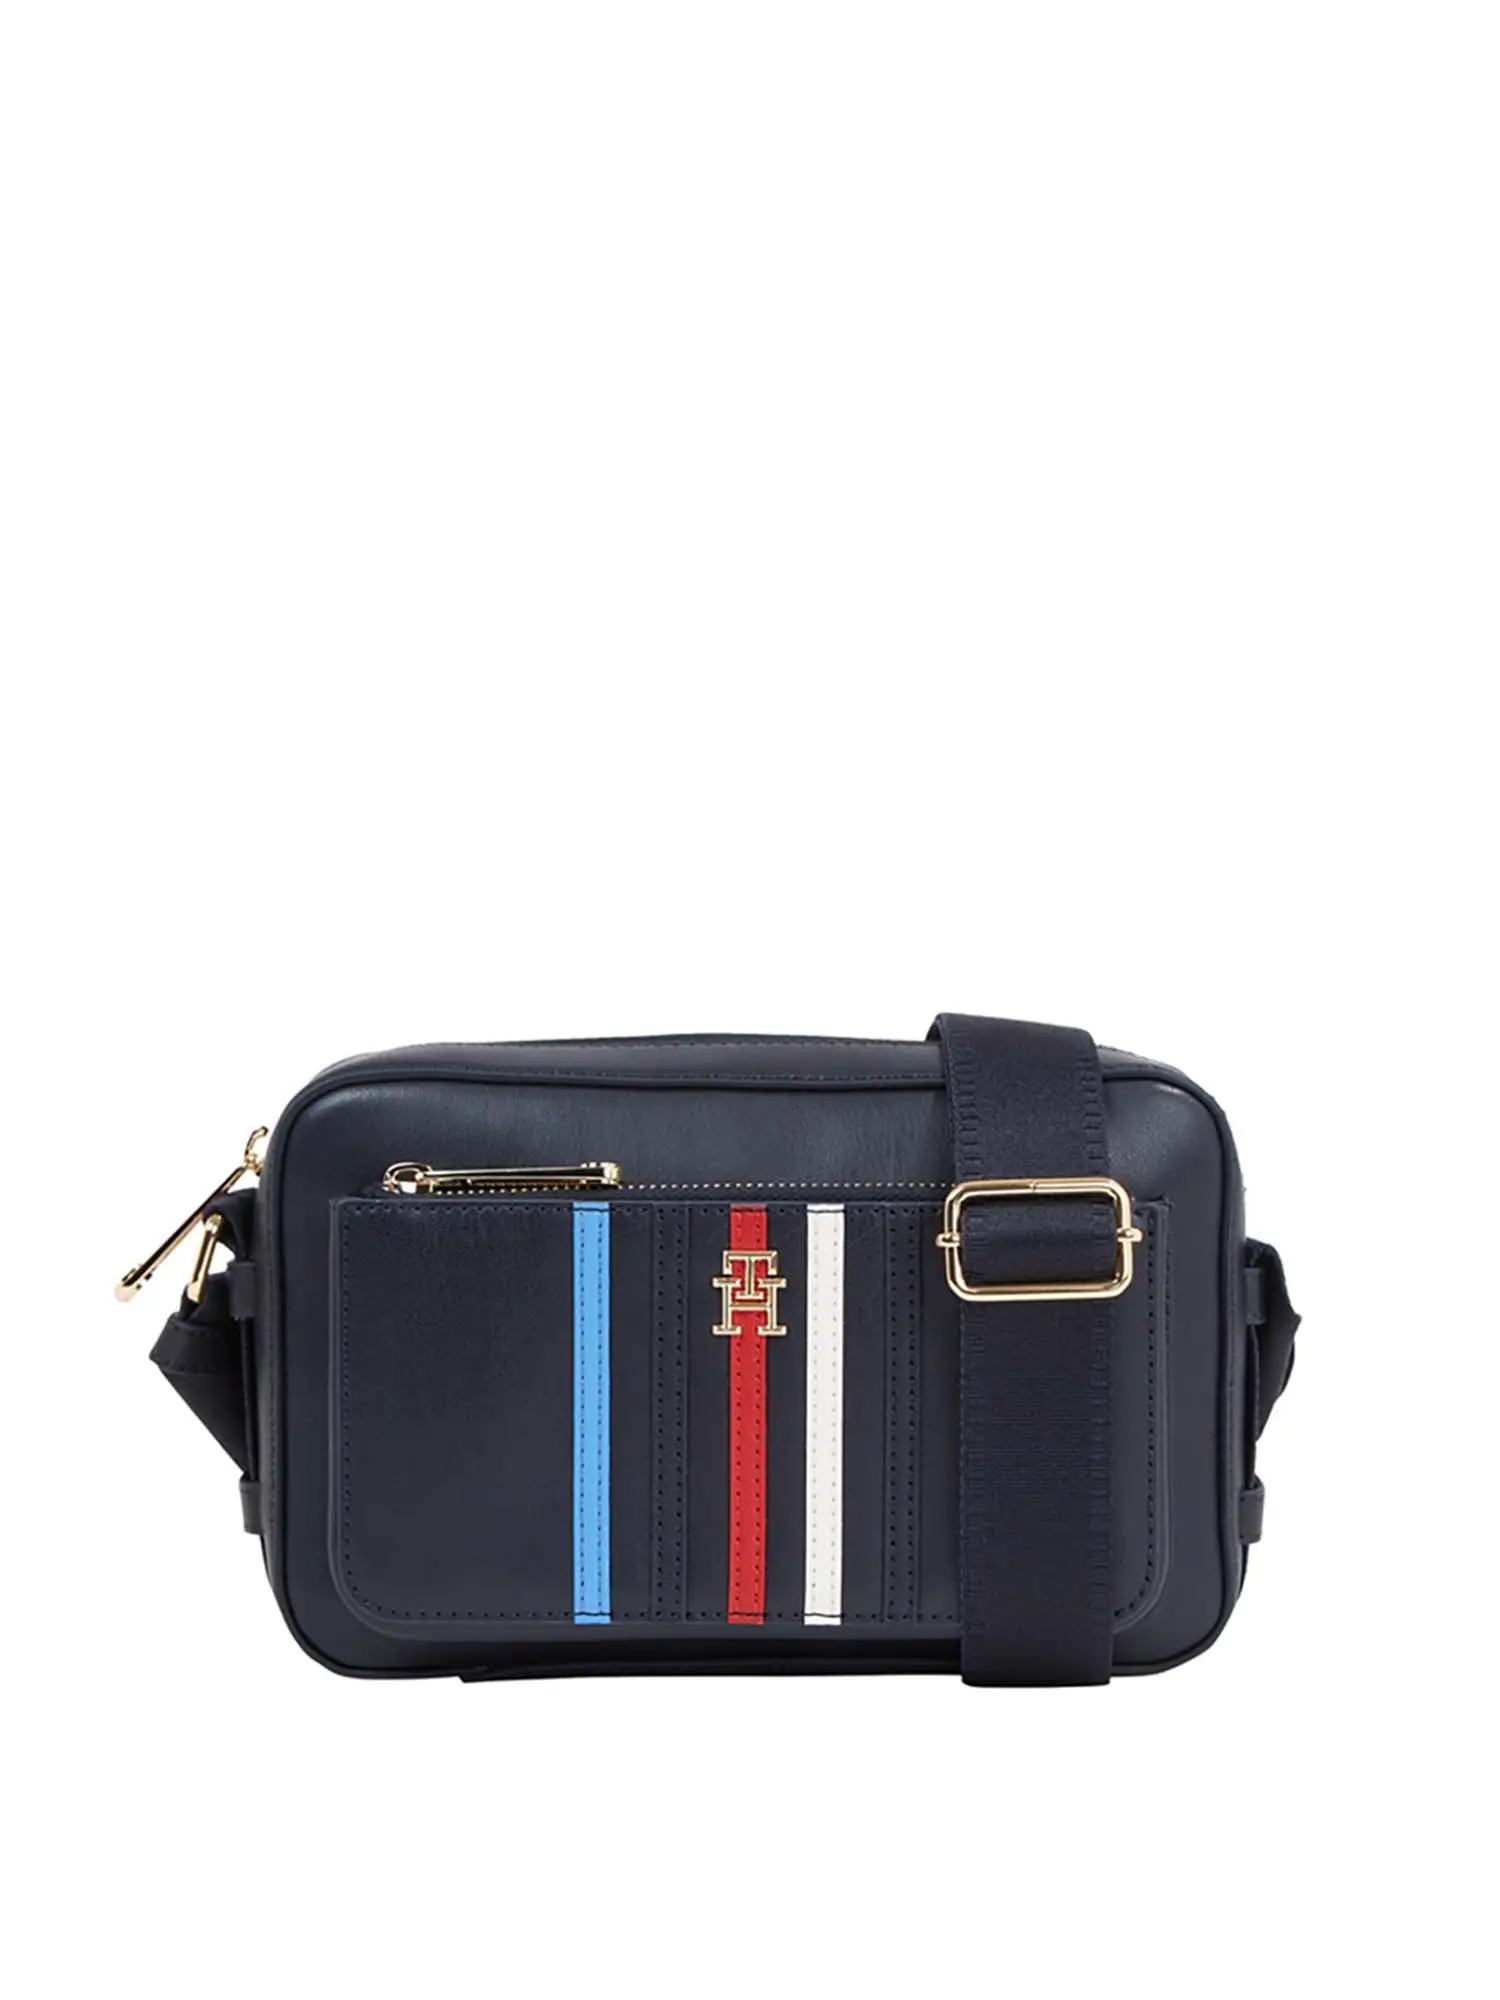 TRACOLLA DONNA - TOMMY HILFIGER - AW0AW16106 - BLU, UNICA